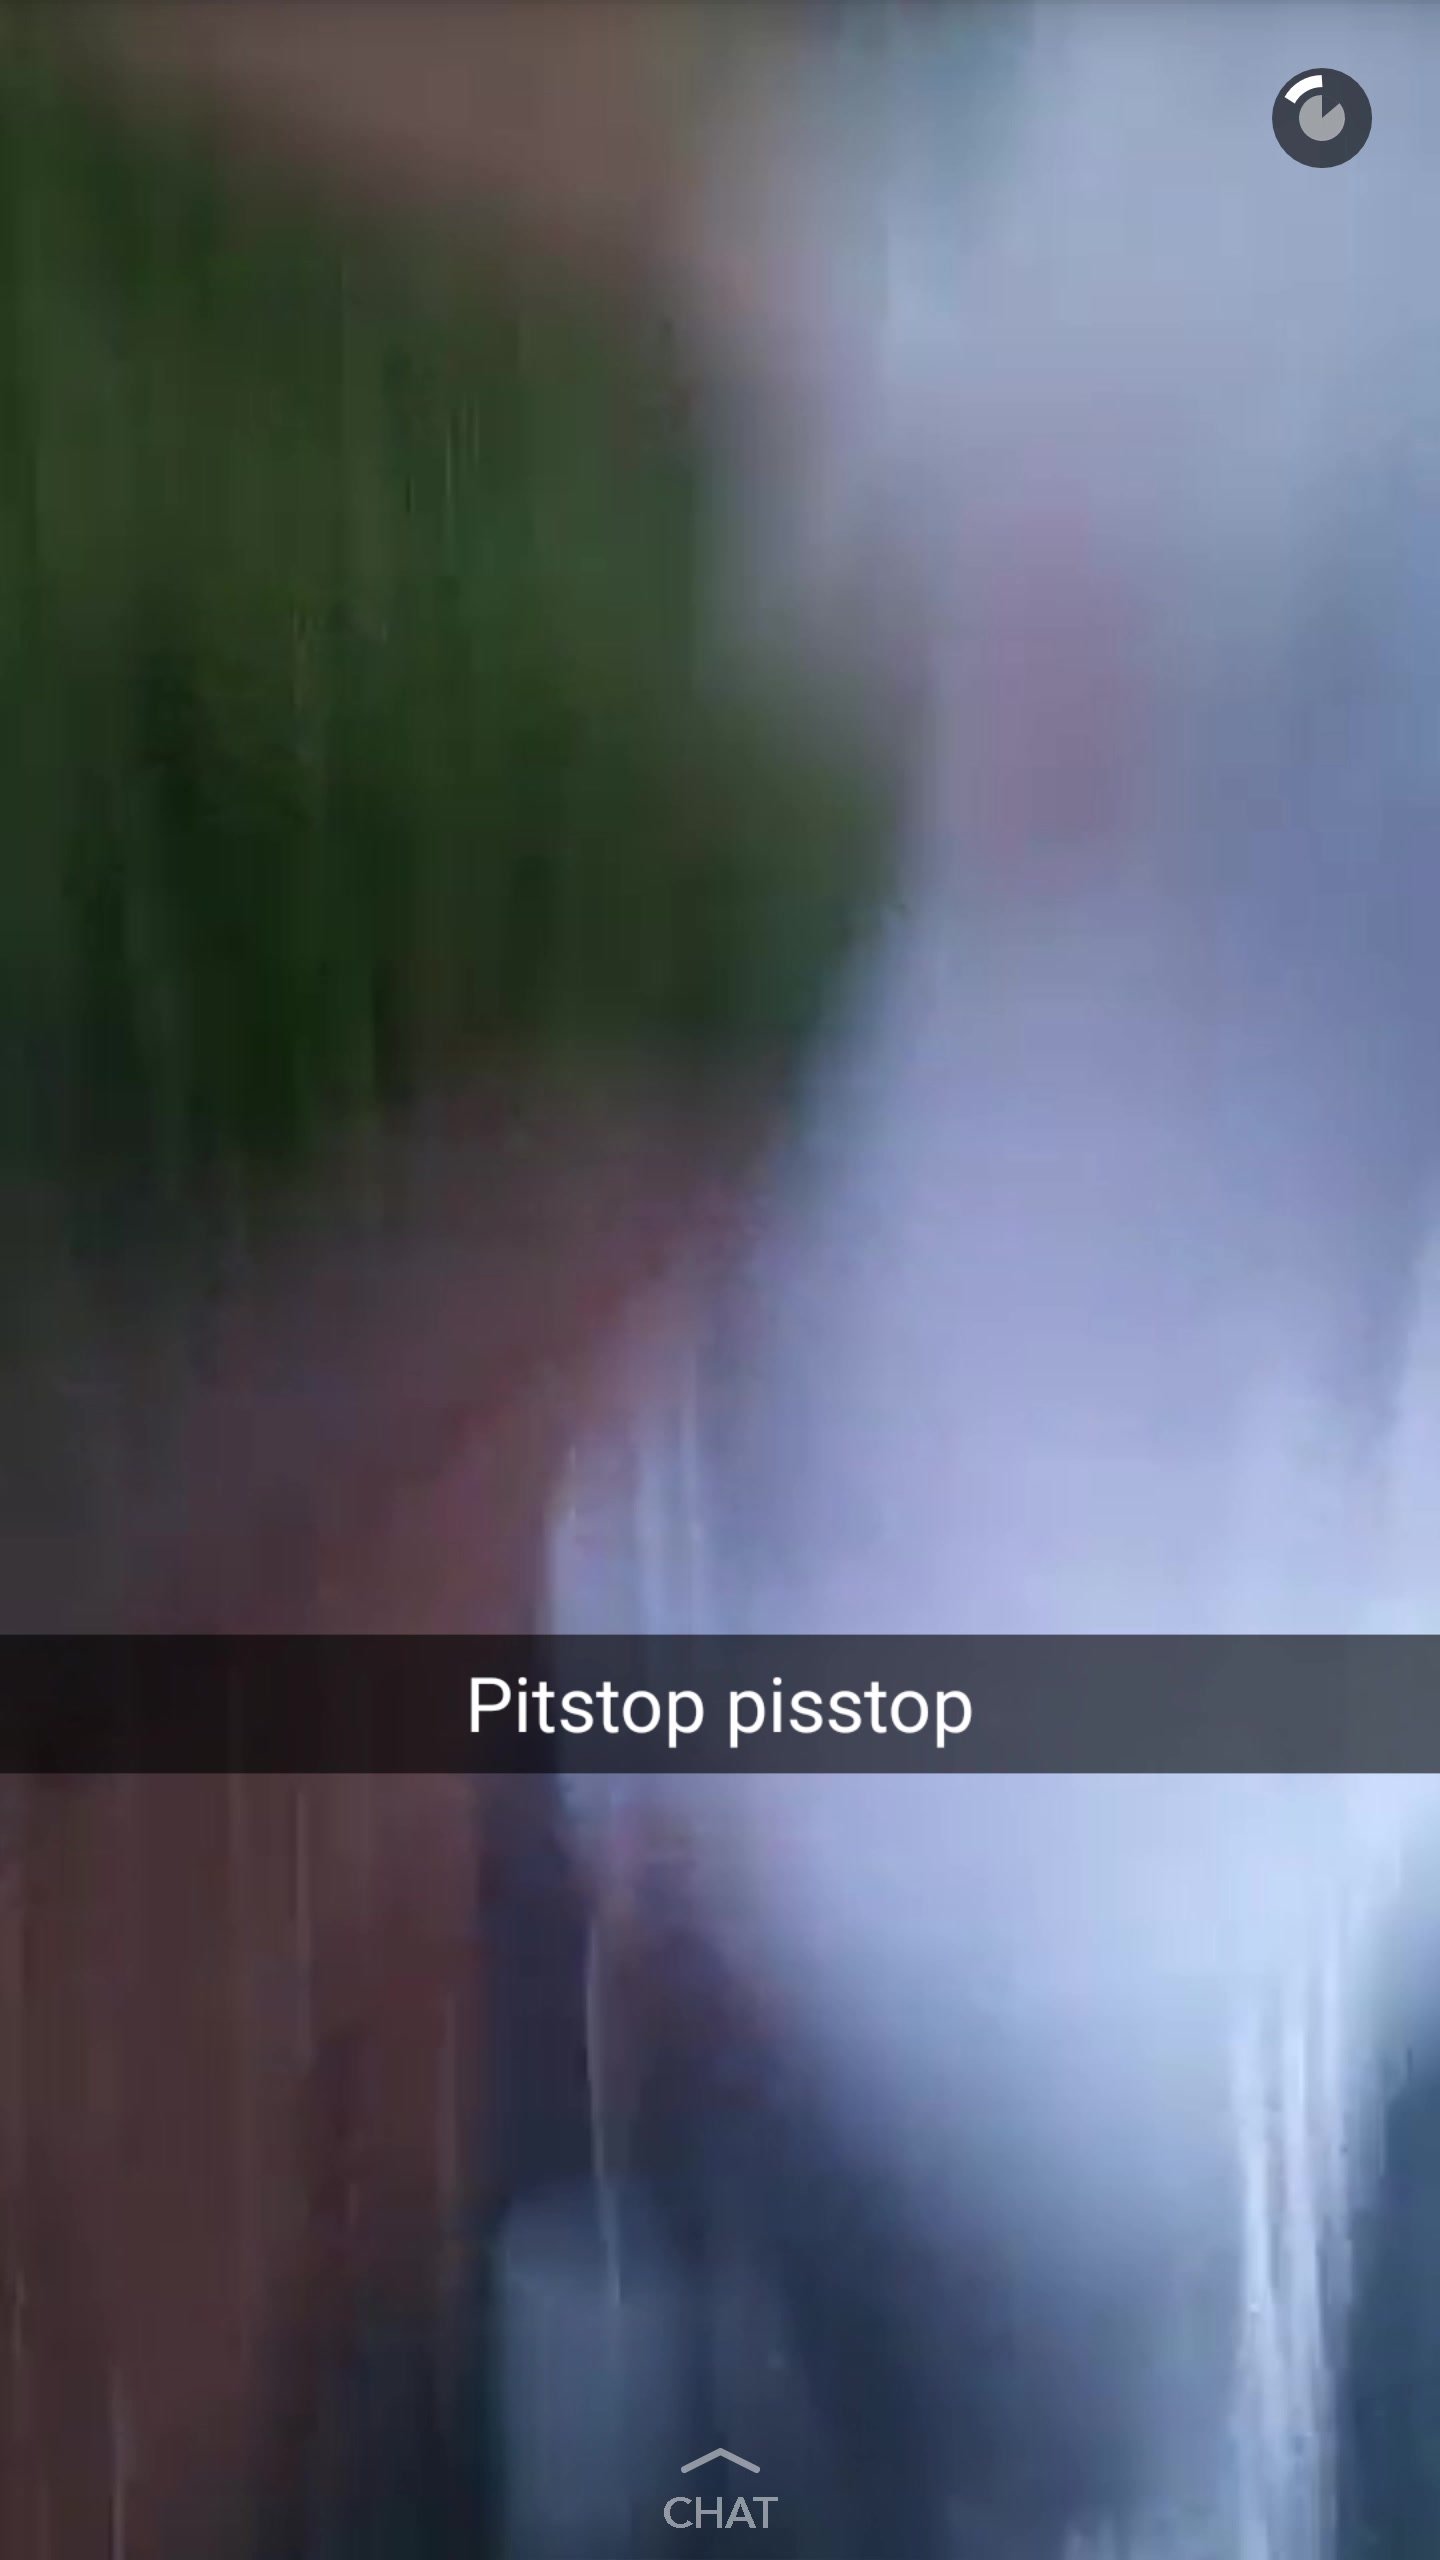 pitstop pissing